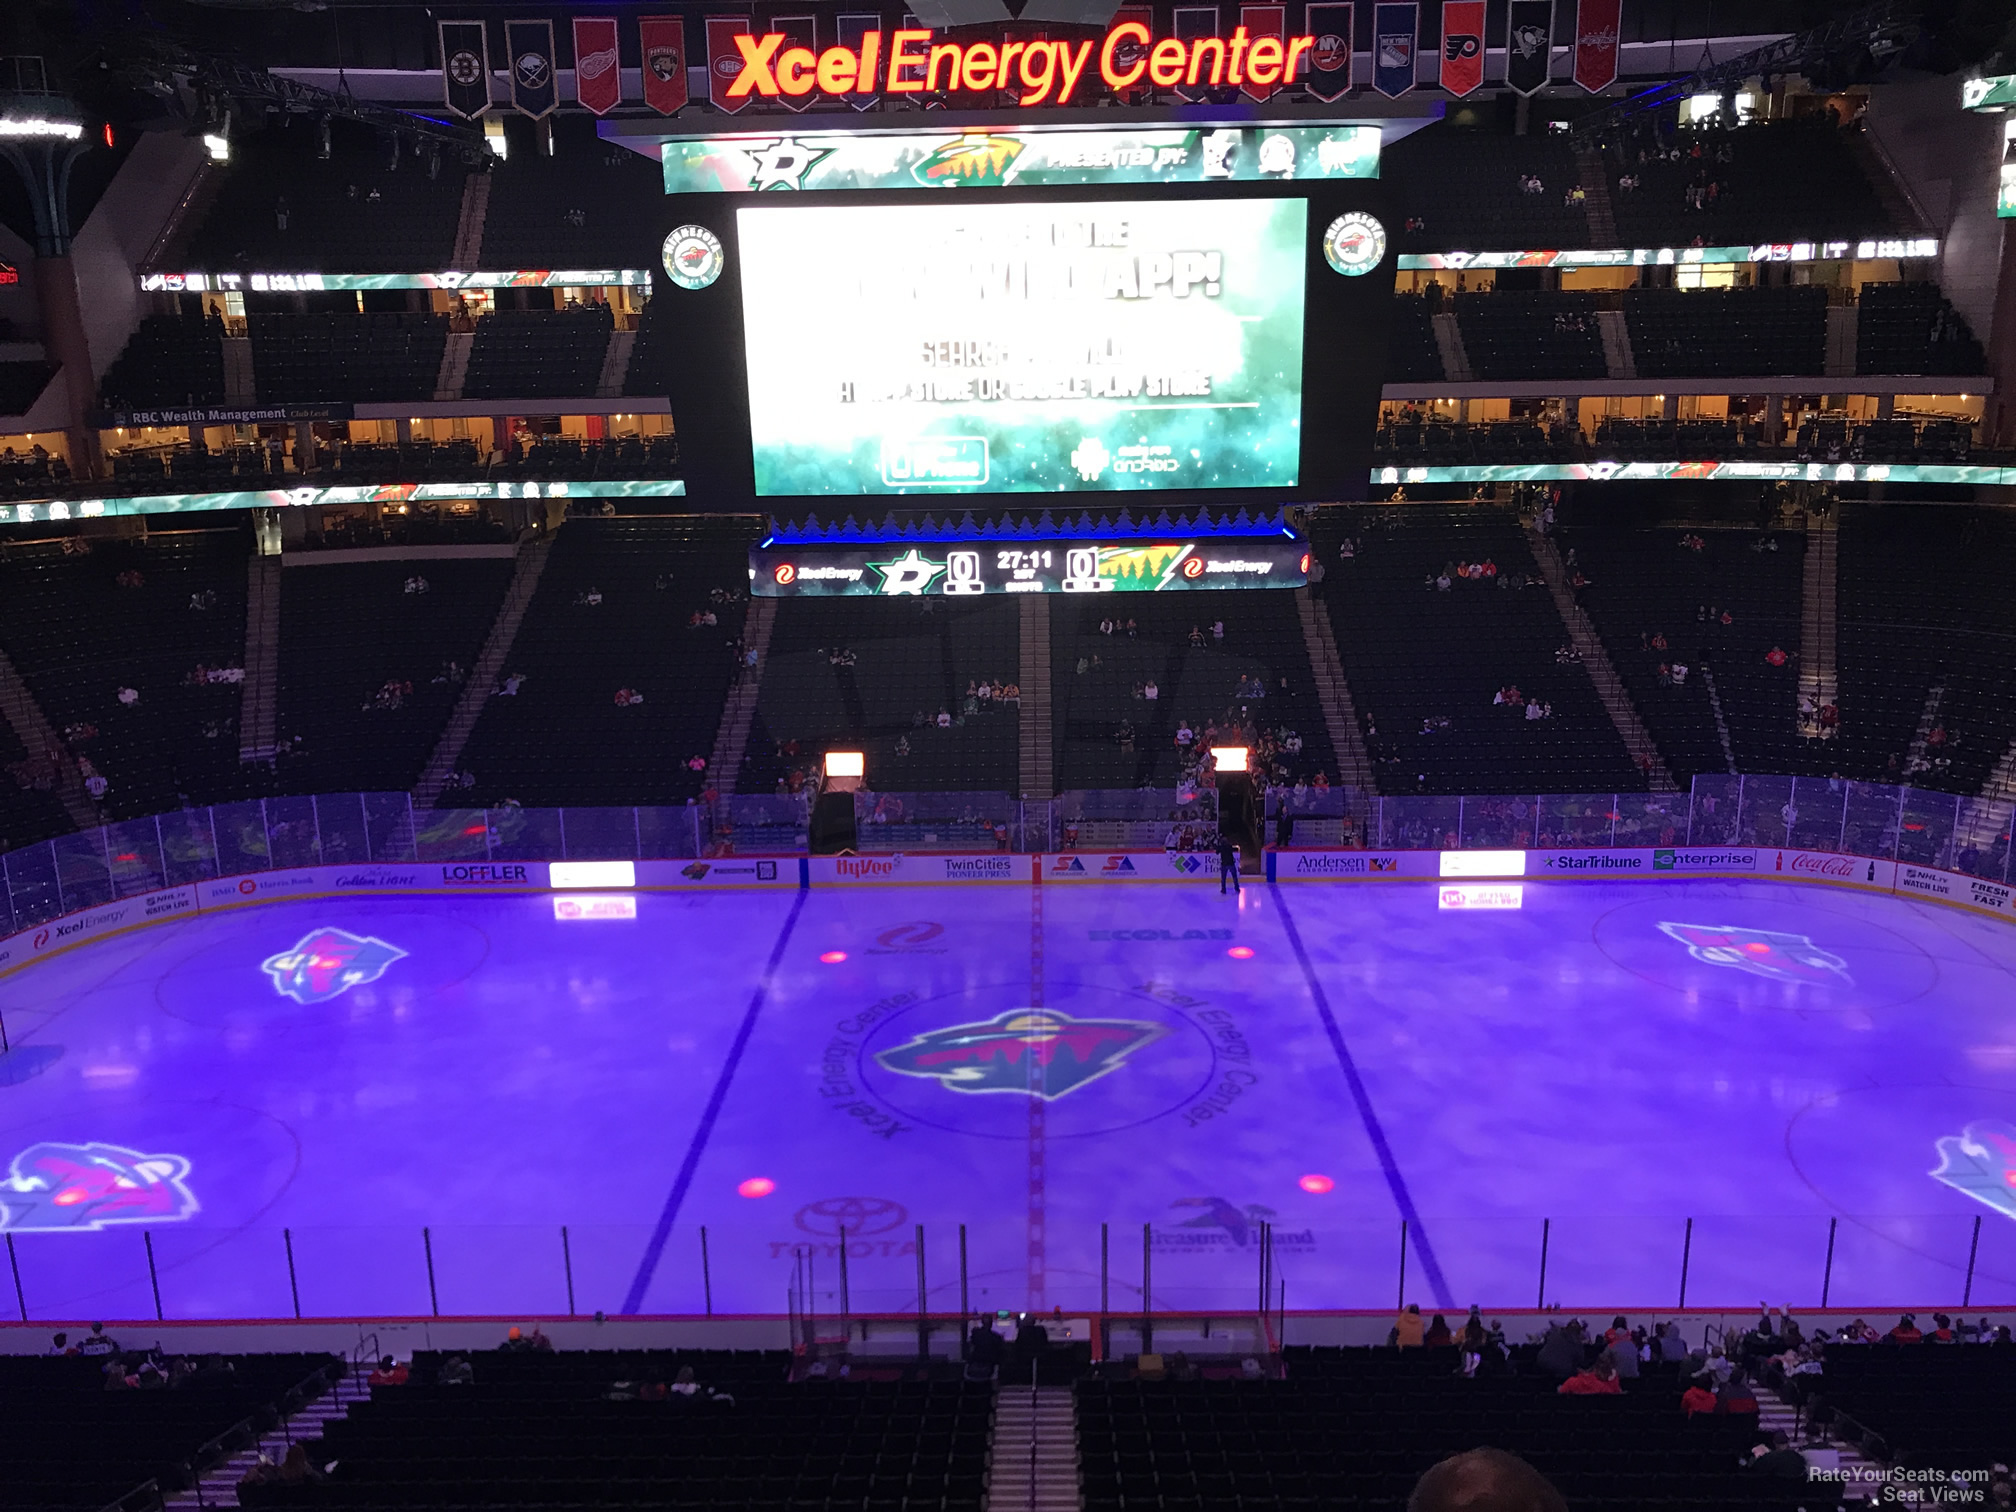 section c6, row 5 seat view  for hockey - xcel energy center